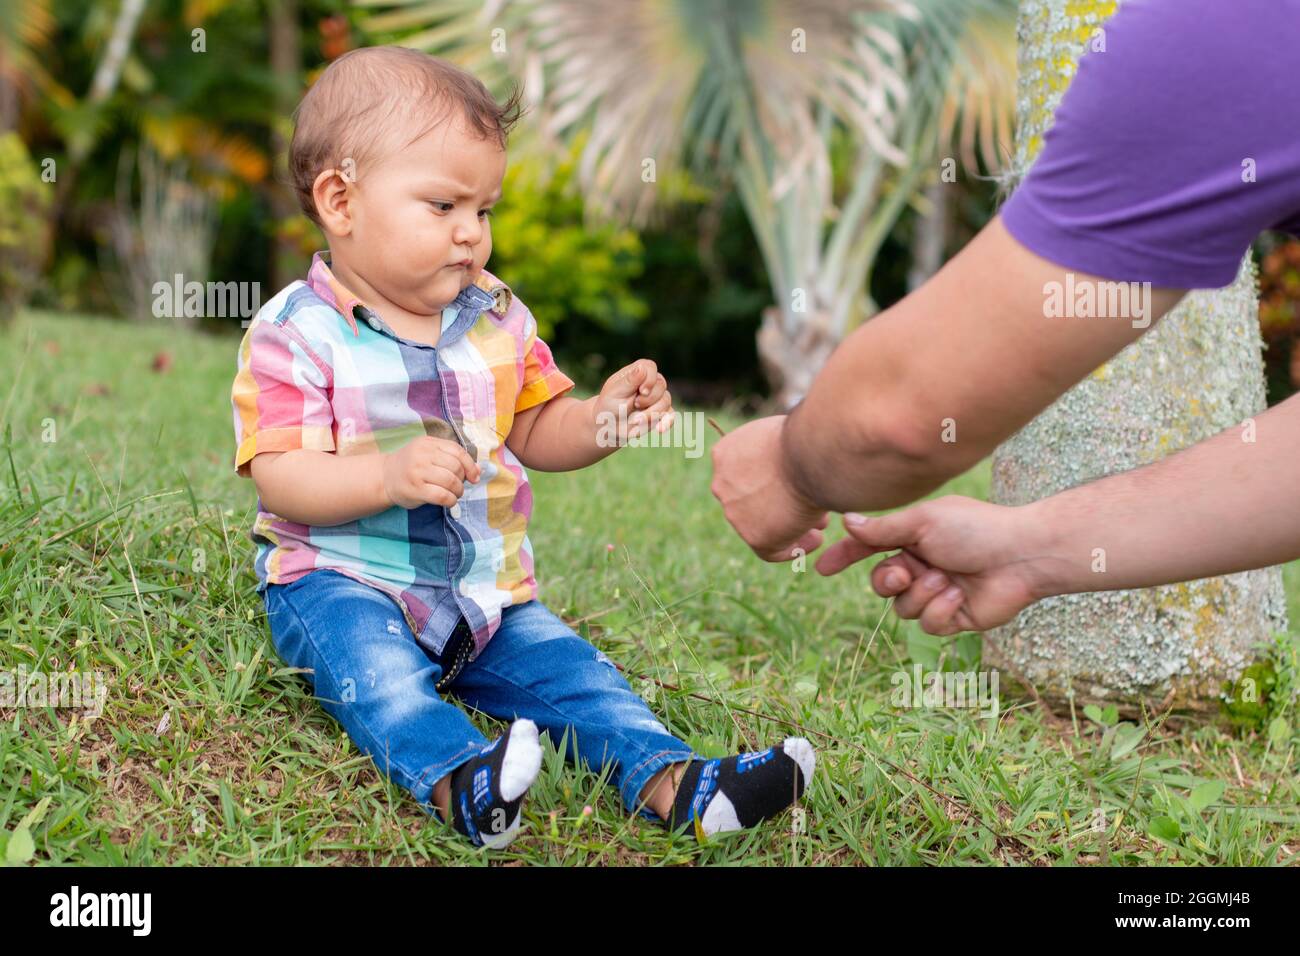 Baby playing in a garden full of nature with her father Stock Photo